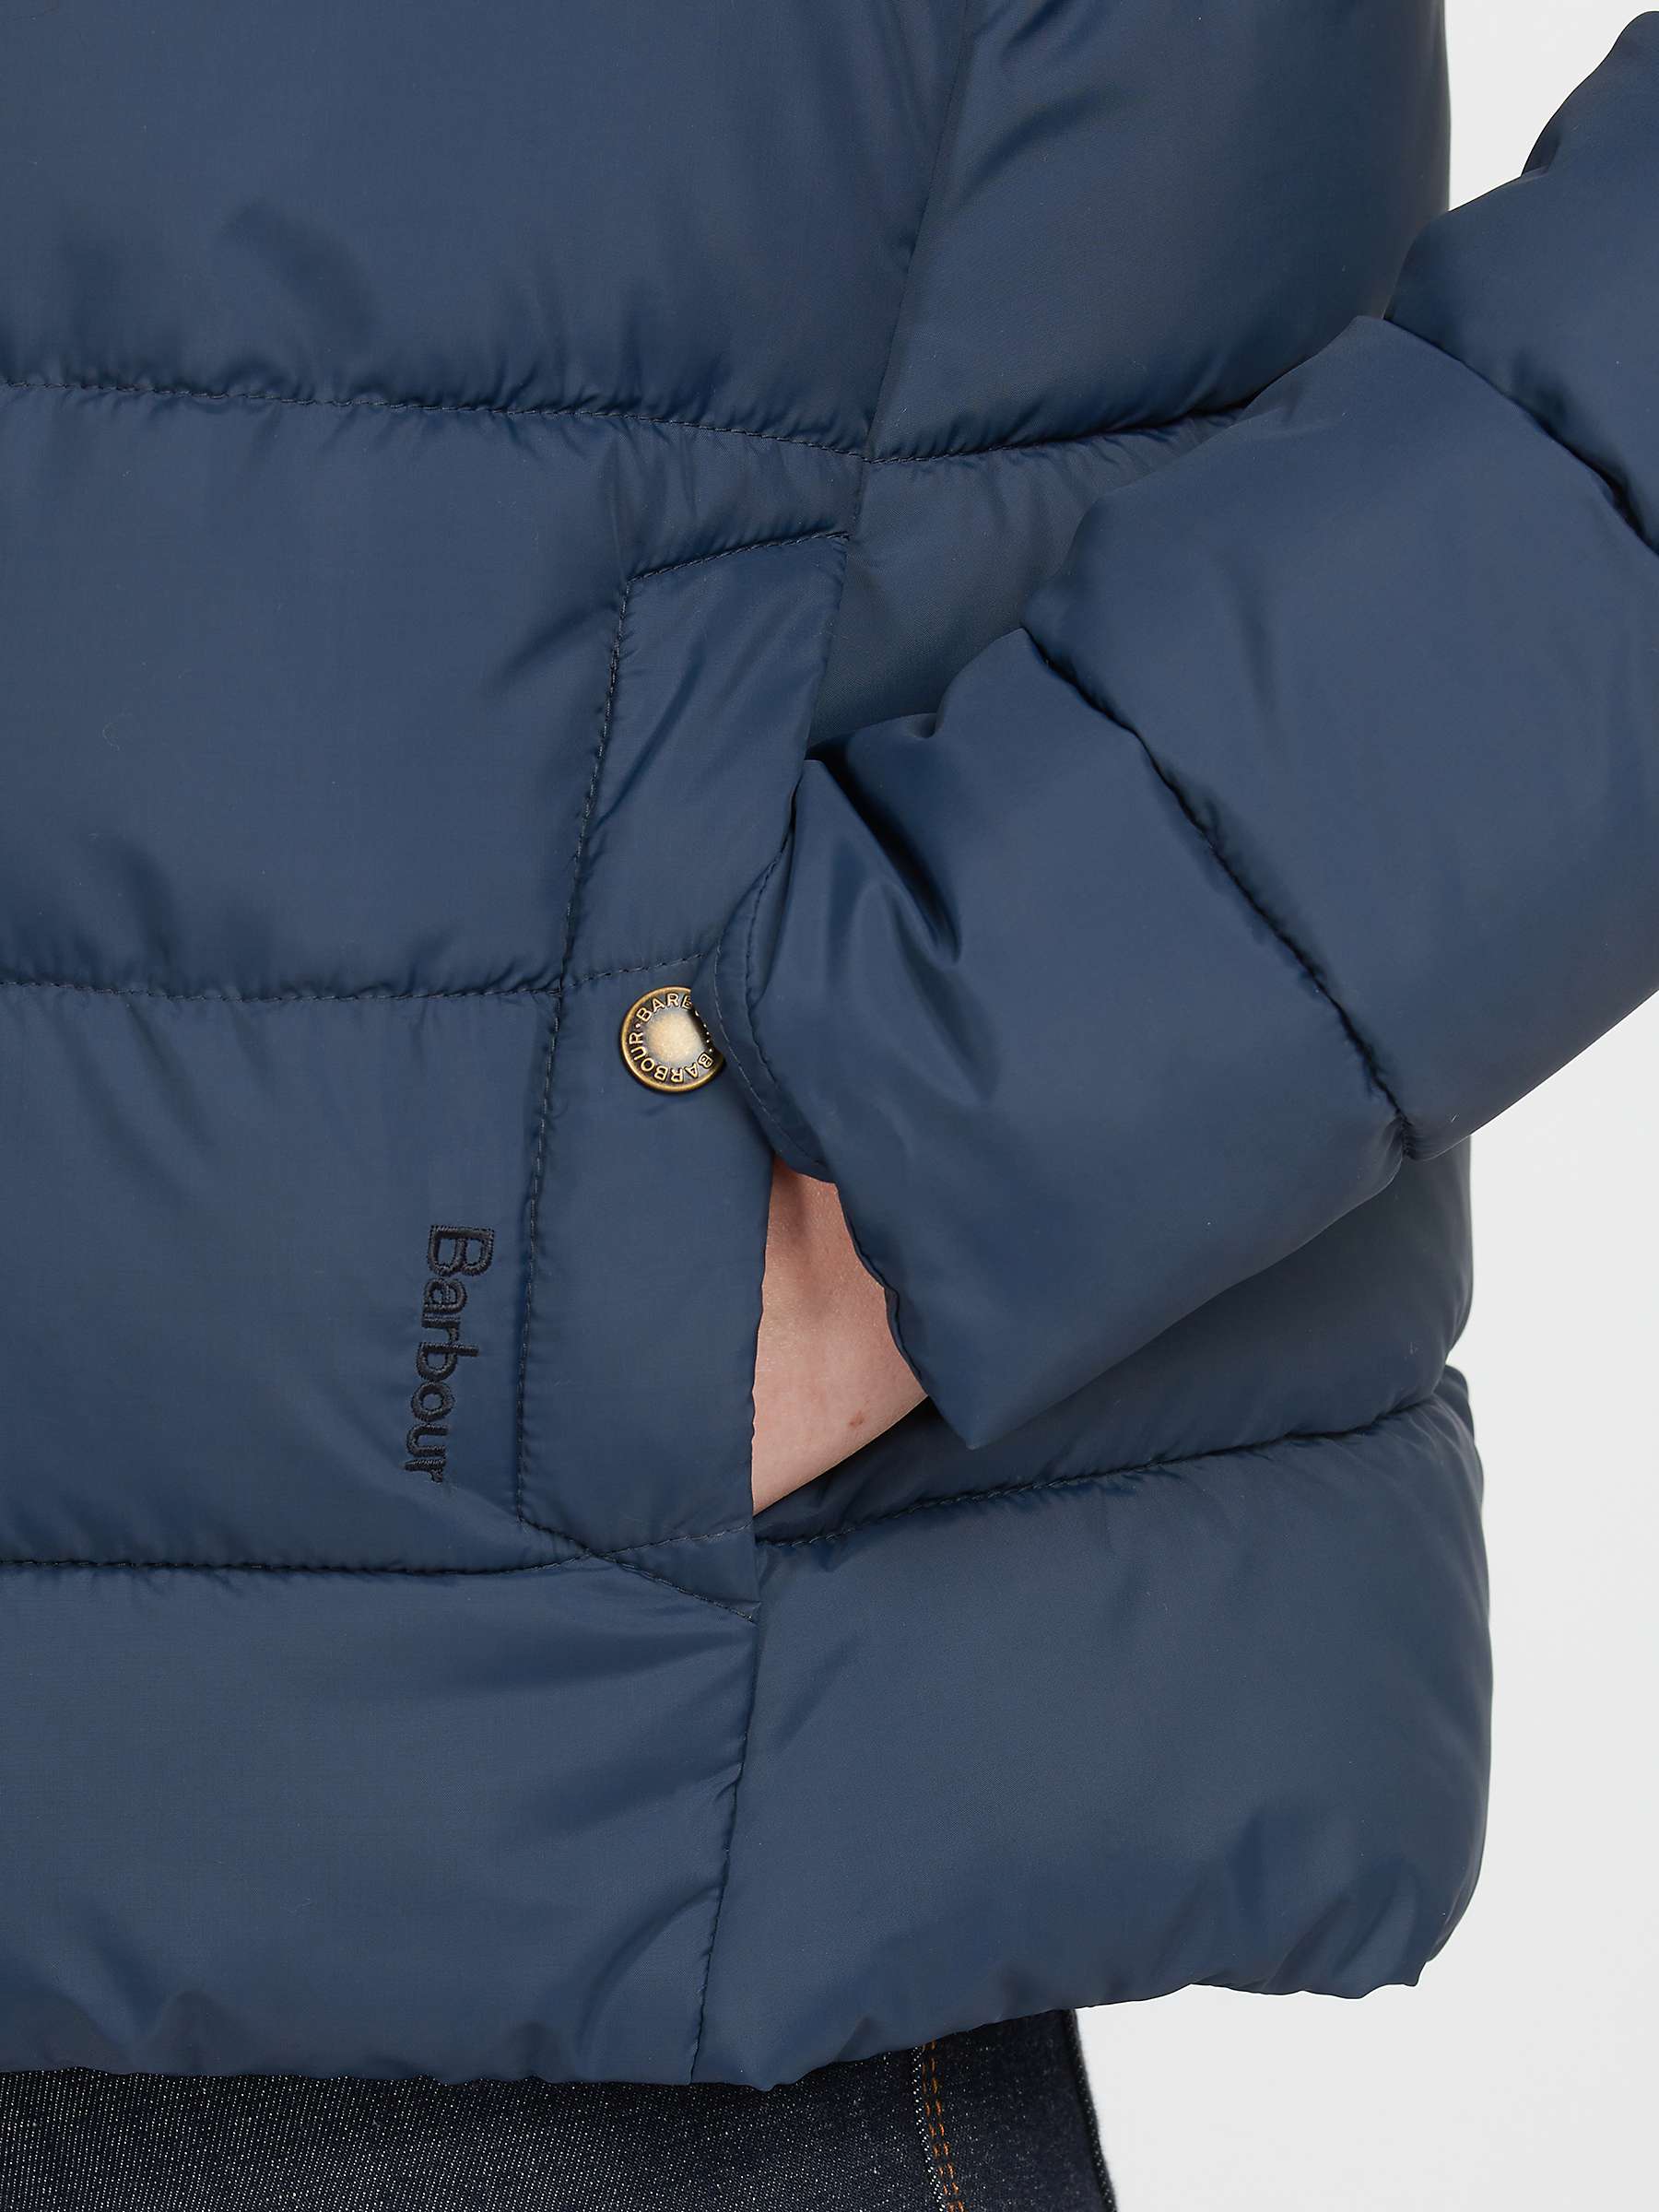 Buy Barbour Hinton Quilted Jacket Online at johnlewis.com